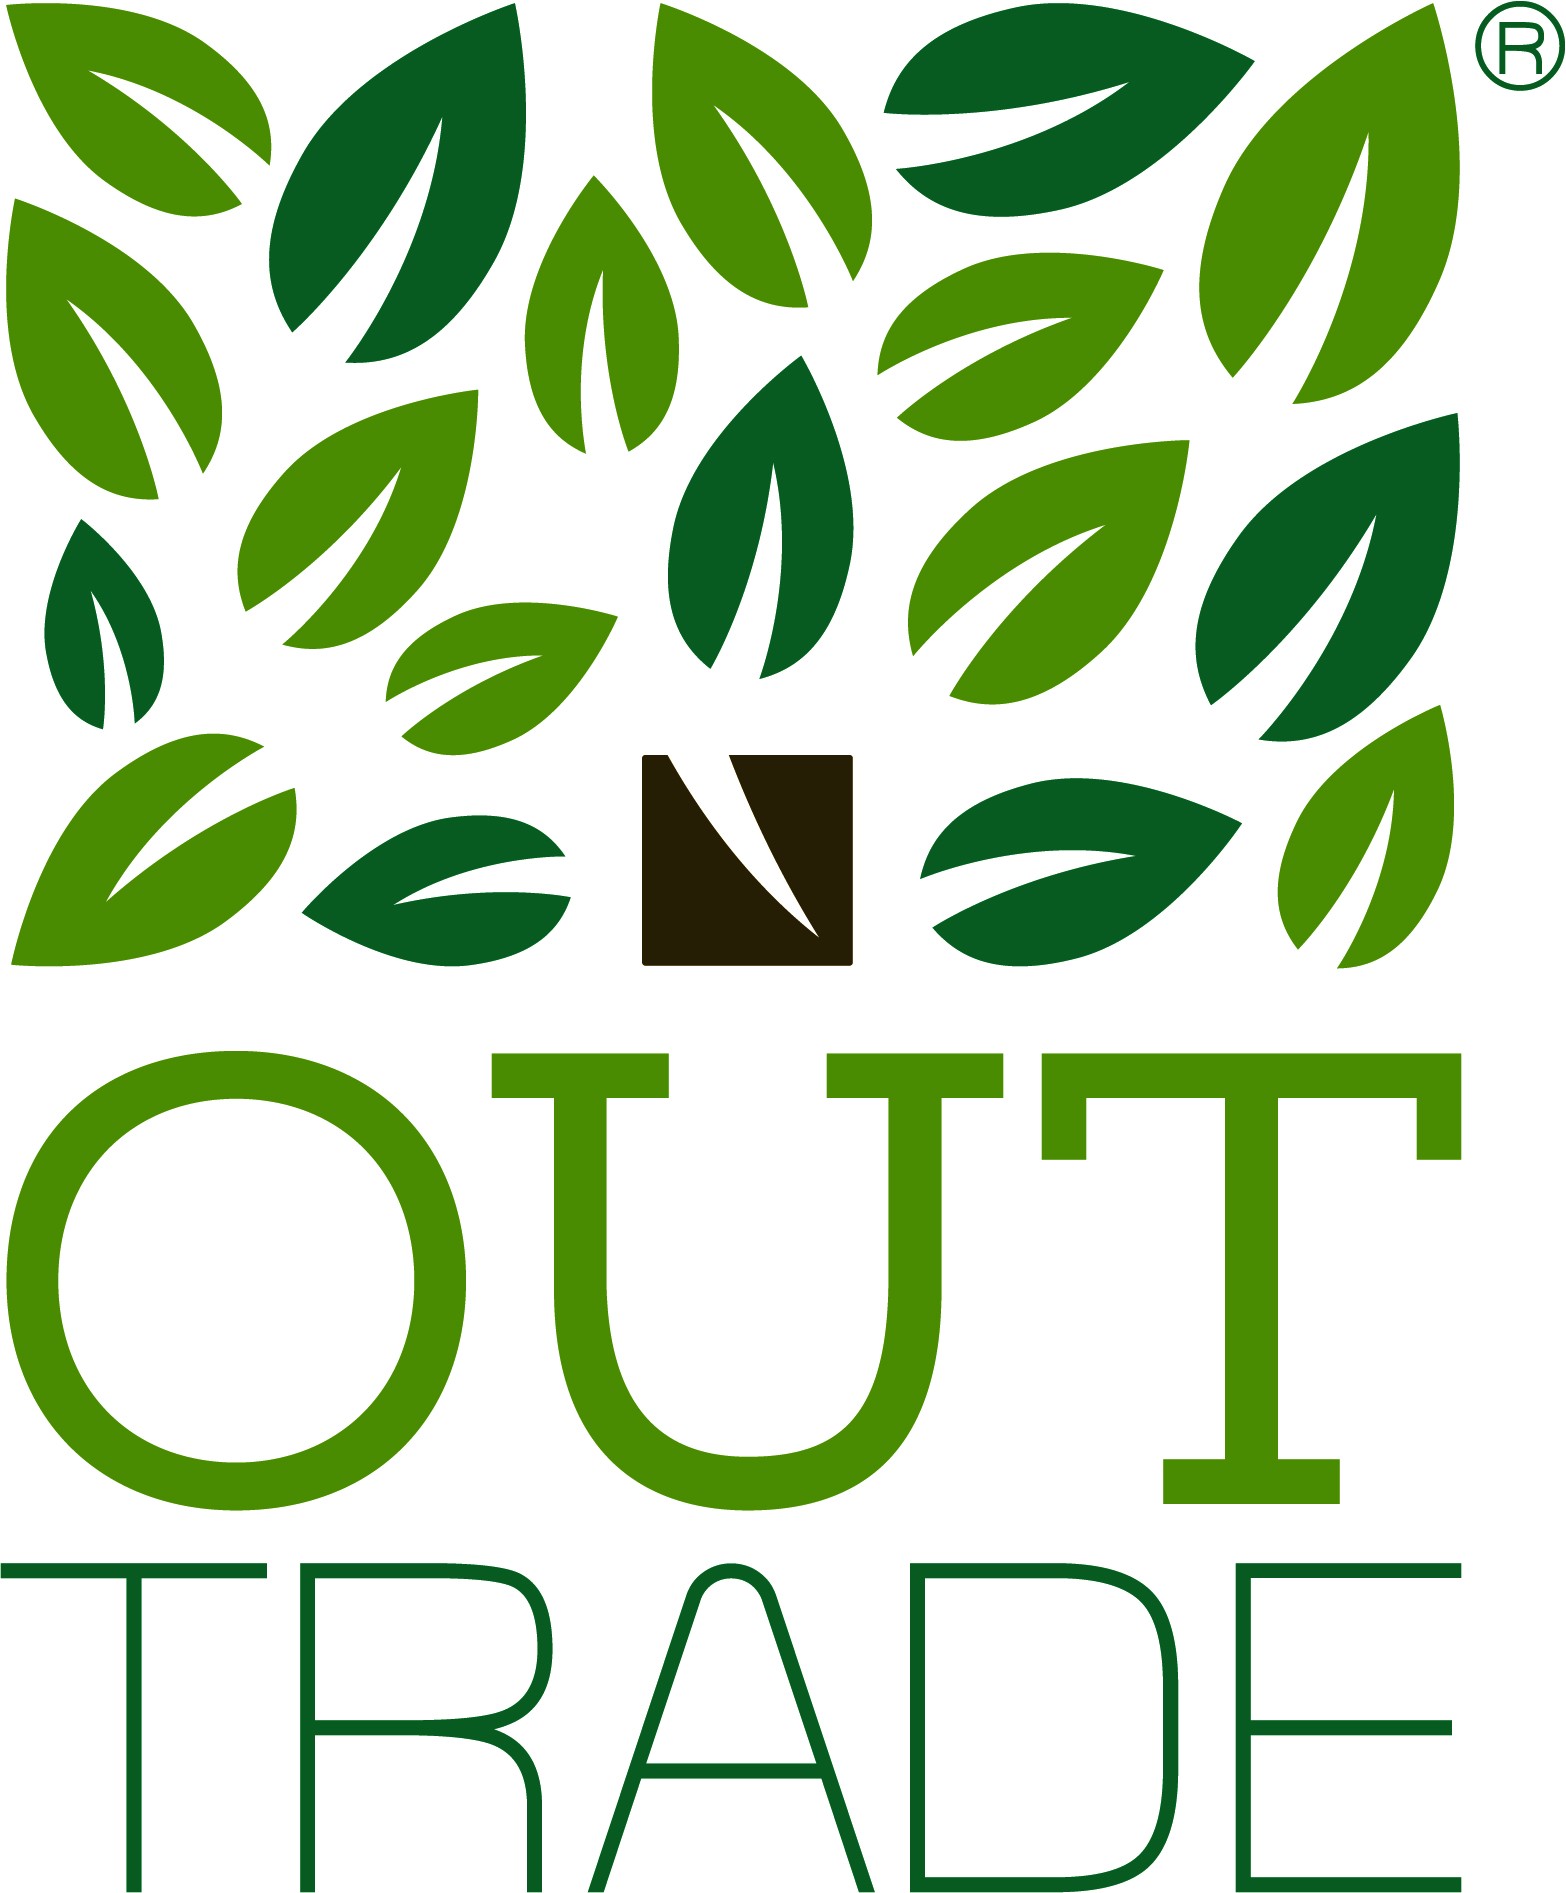 Outtrade